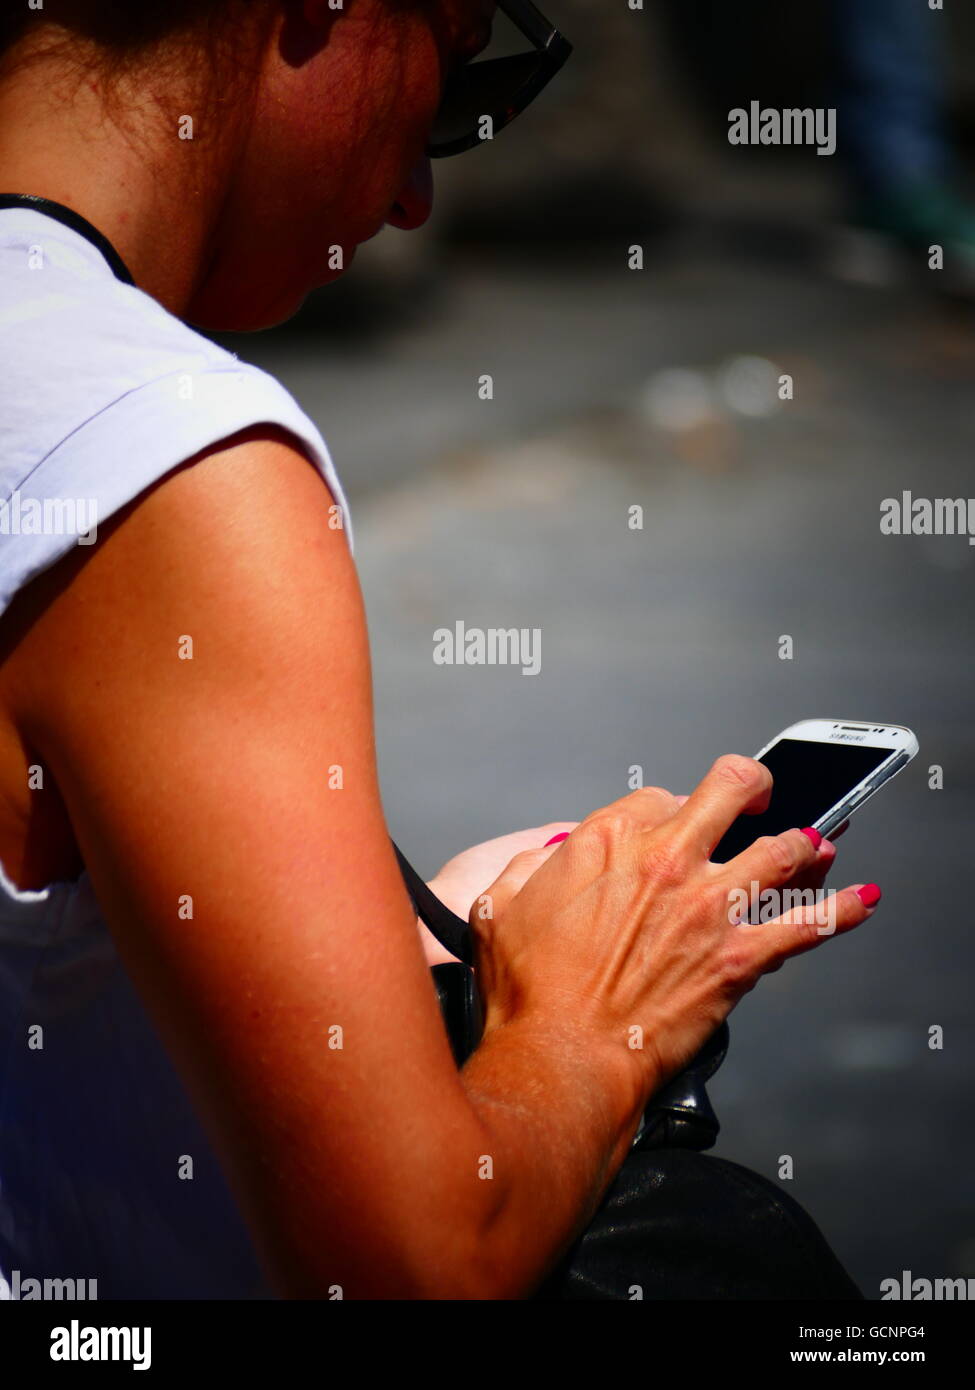 Lady Woman checking SMS email on smartphone iPhone Stock Photo